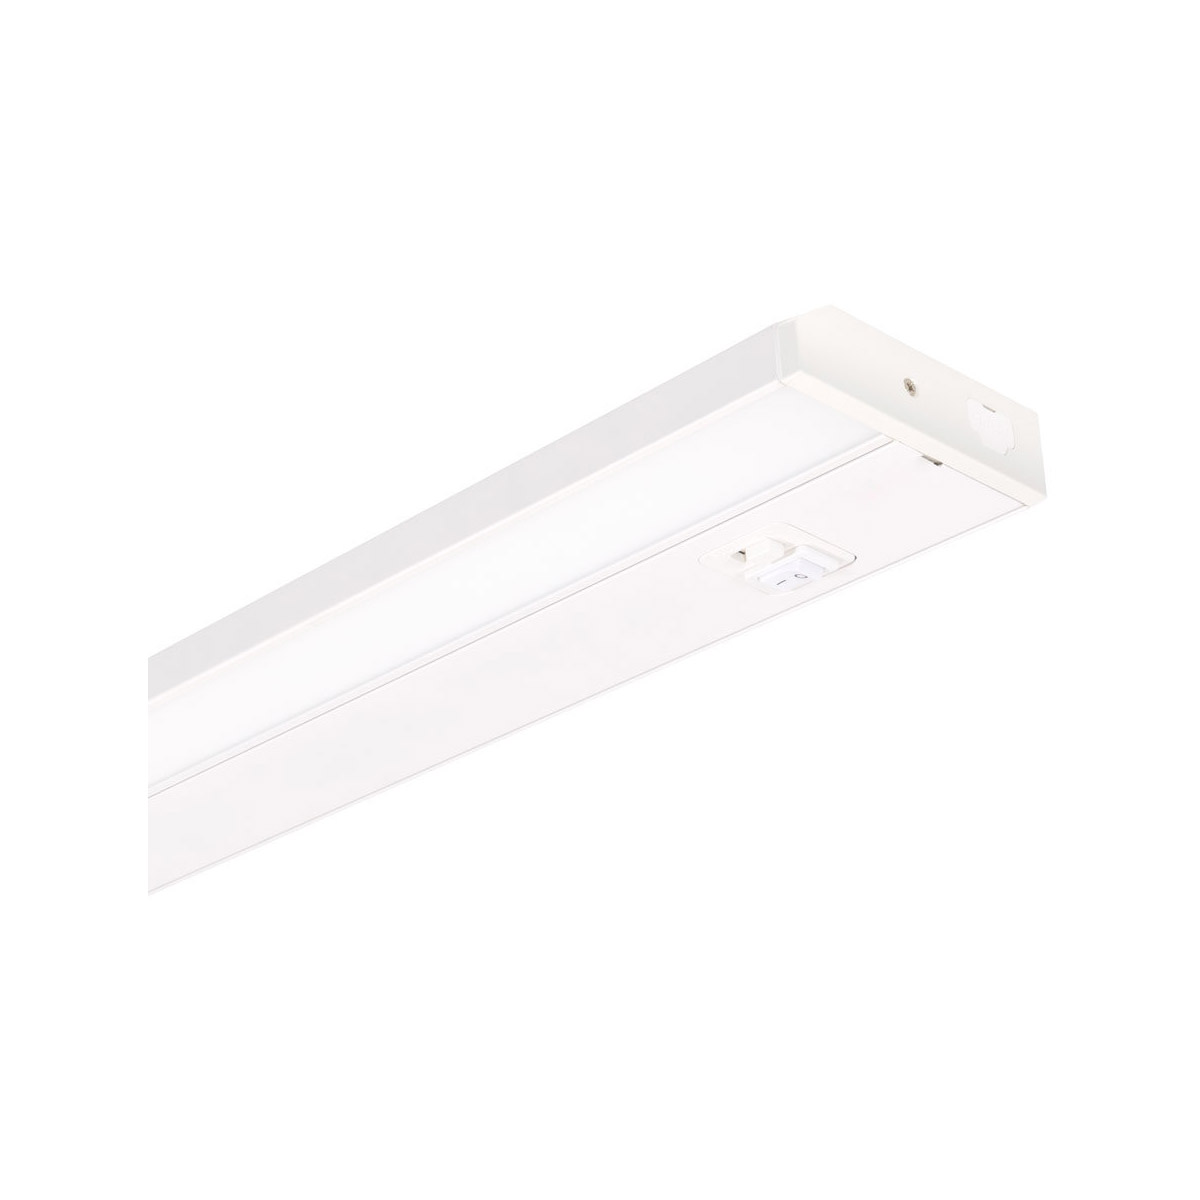 Picture of Jesco SG150-32-SWC-WH 32 in. 16W Shallow Profile LED Linkable Undercabinet Light with Adjustable Color Temperature, White